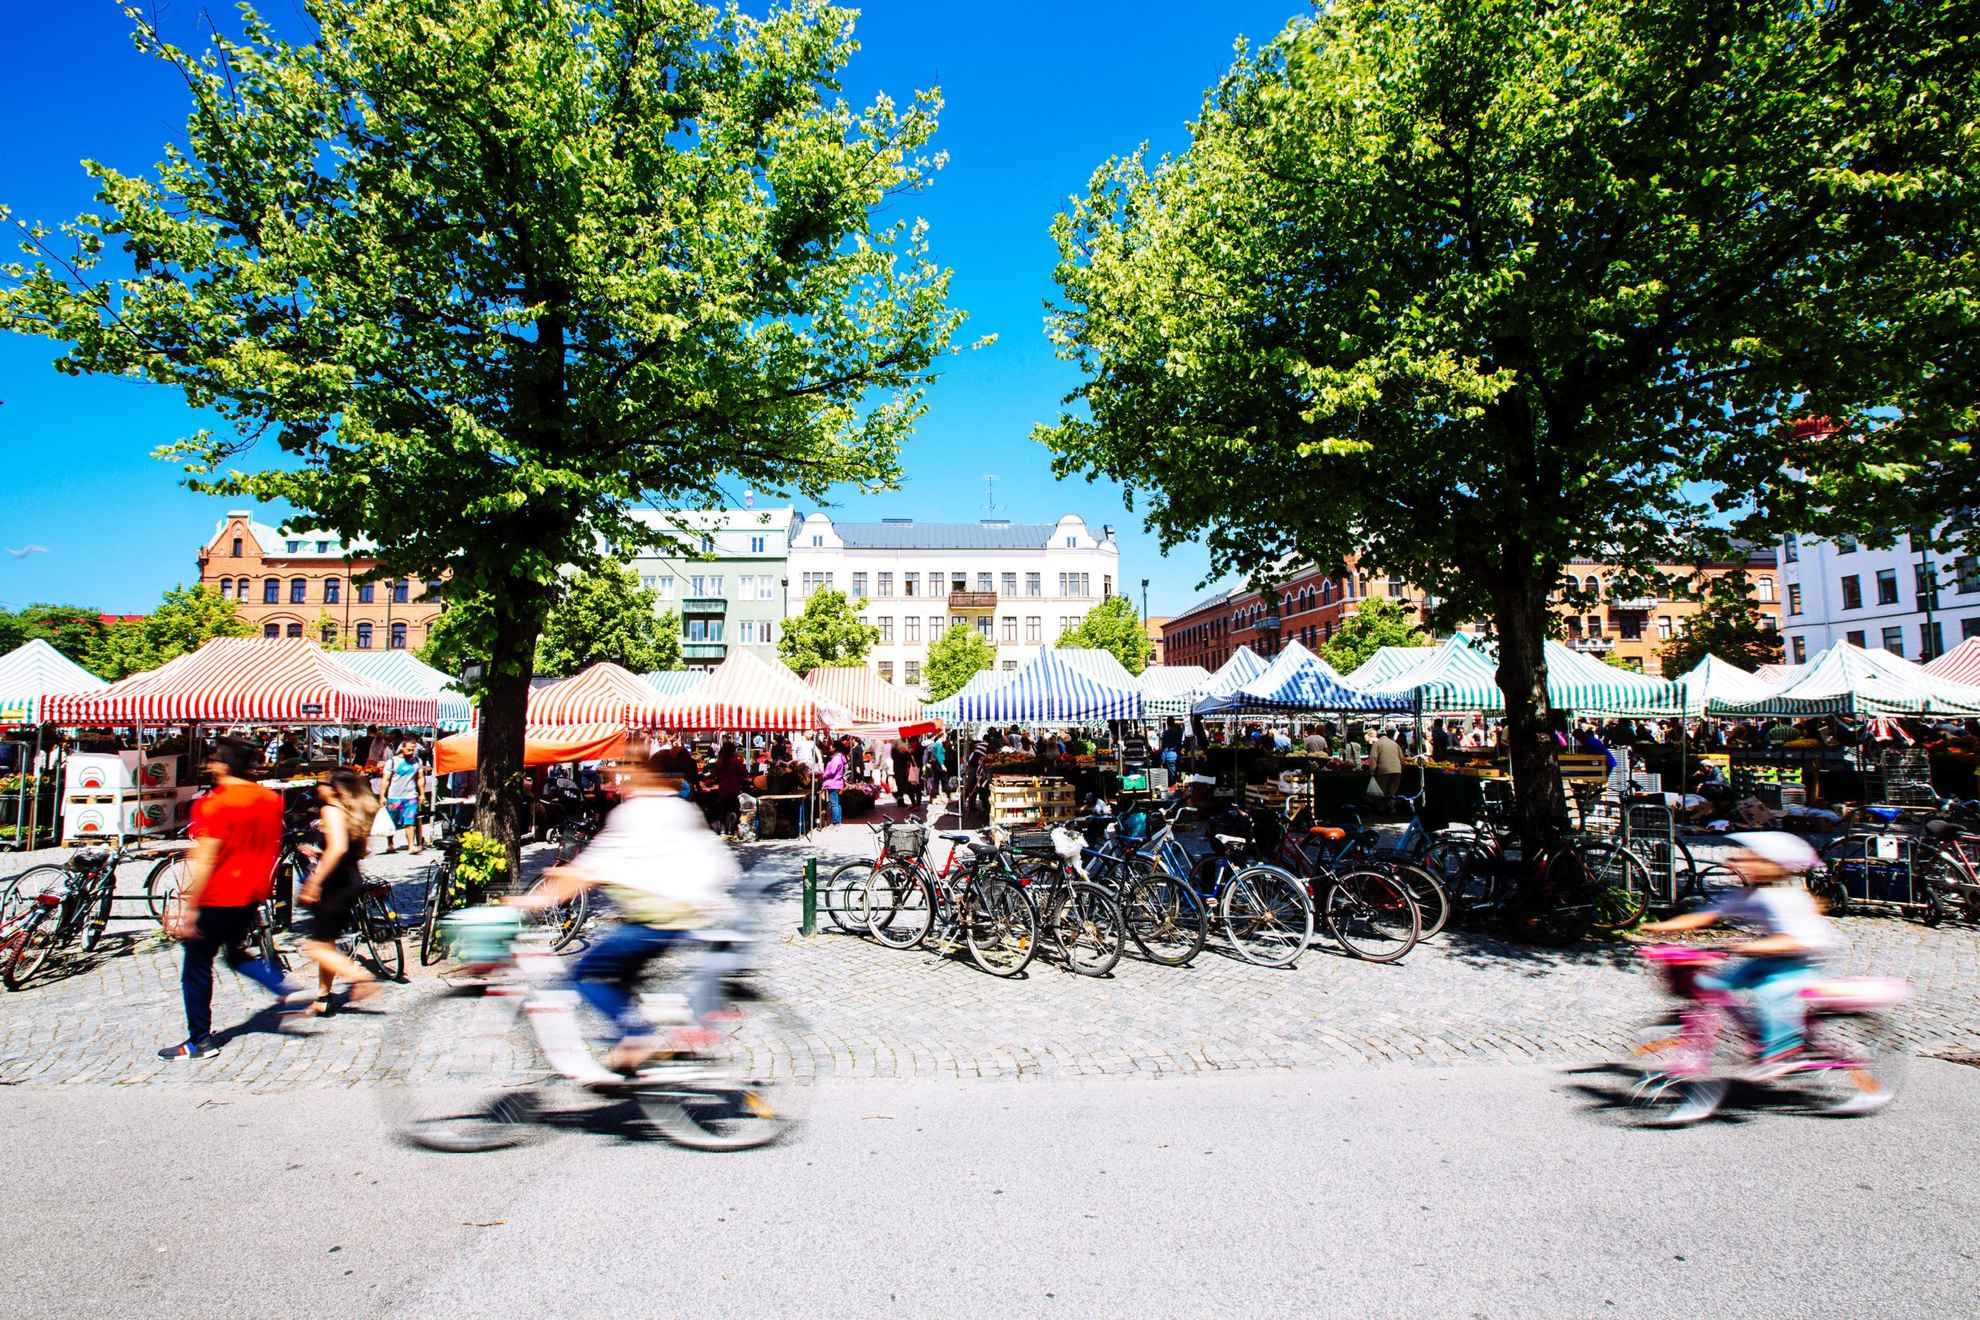 A square full of stalls with striped roofs. Bikes are parked along a road and you see two blurry cyclists  passing by.